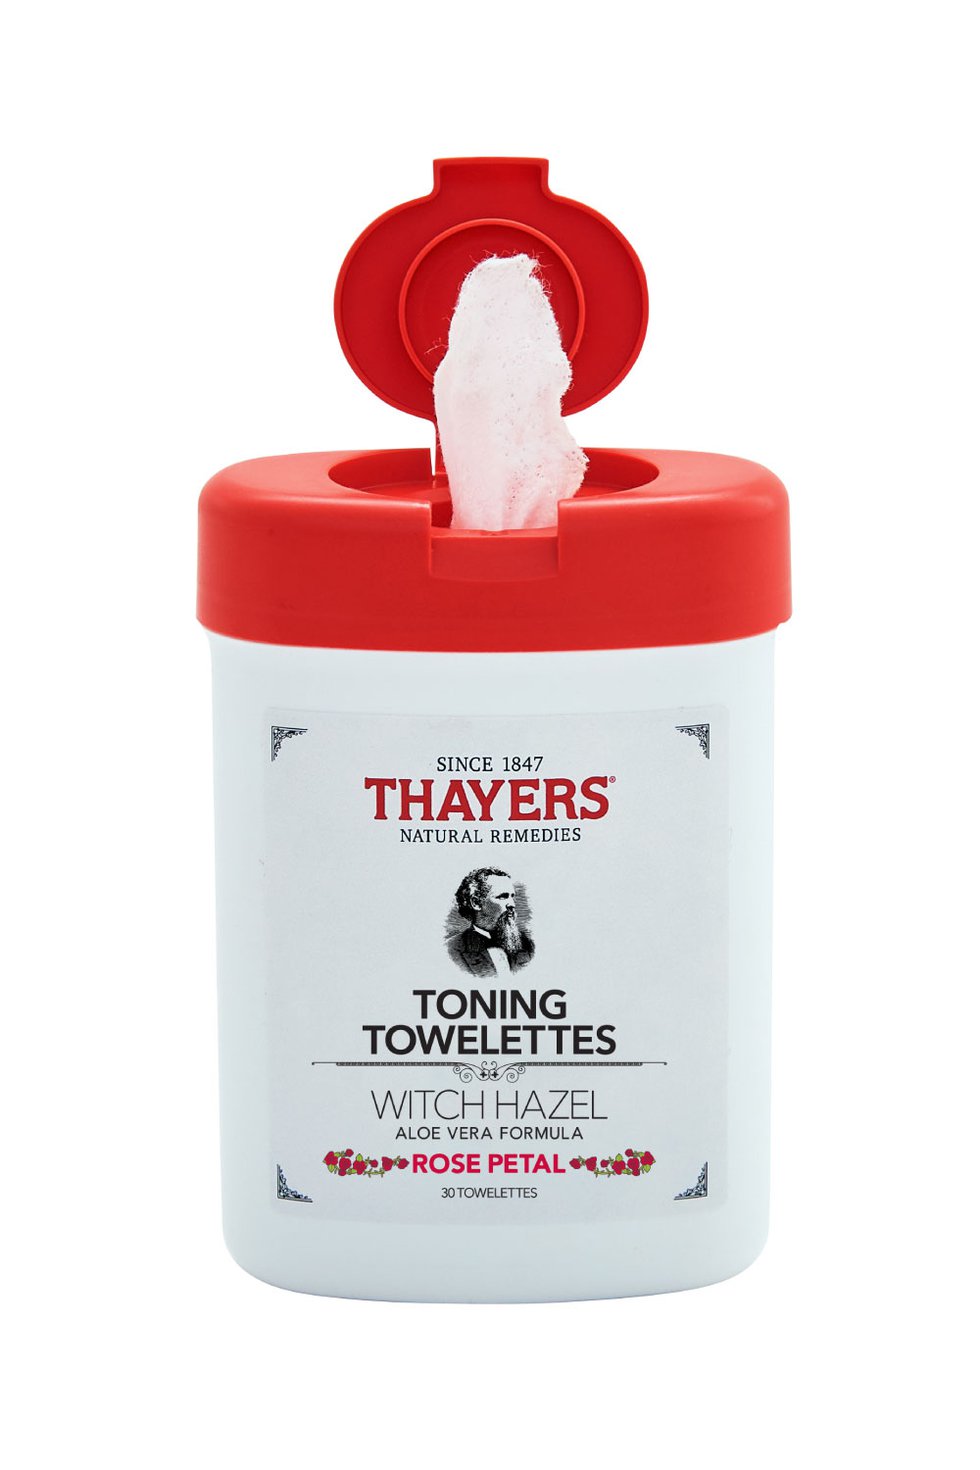 thayers towelettes